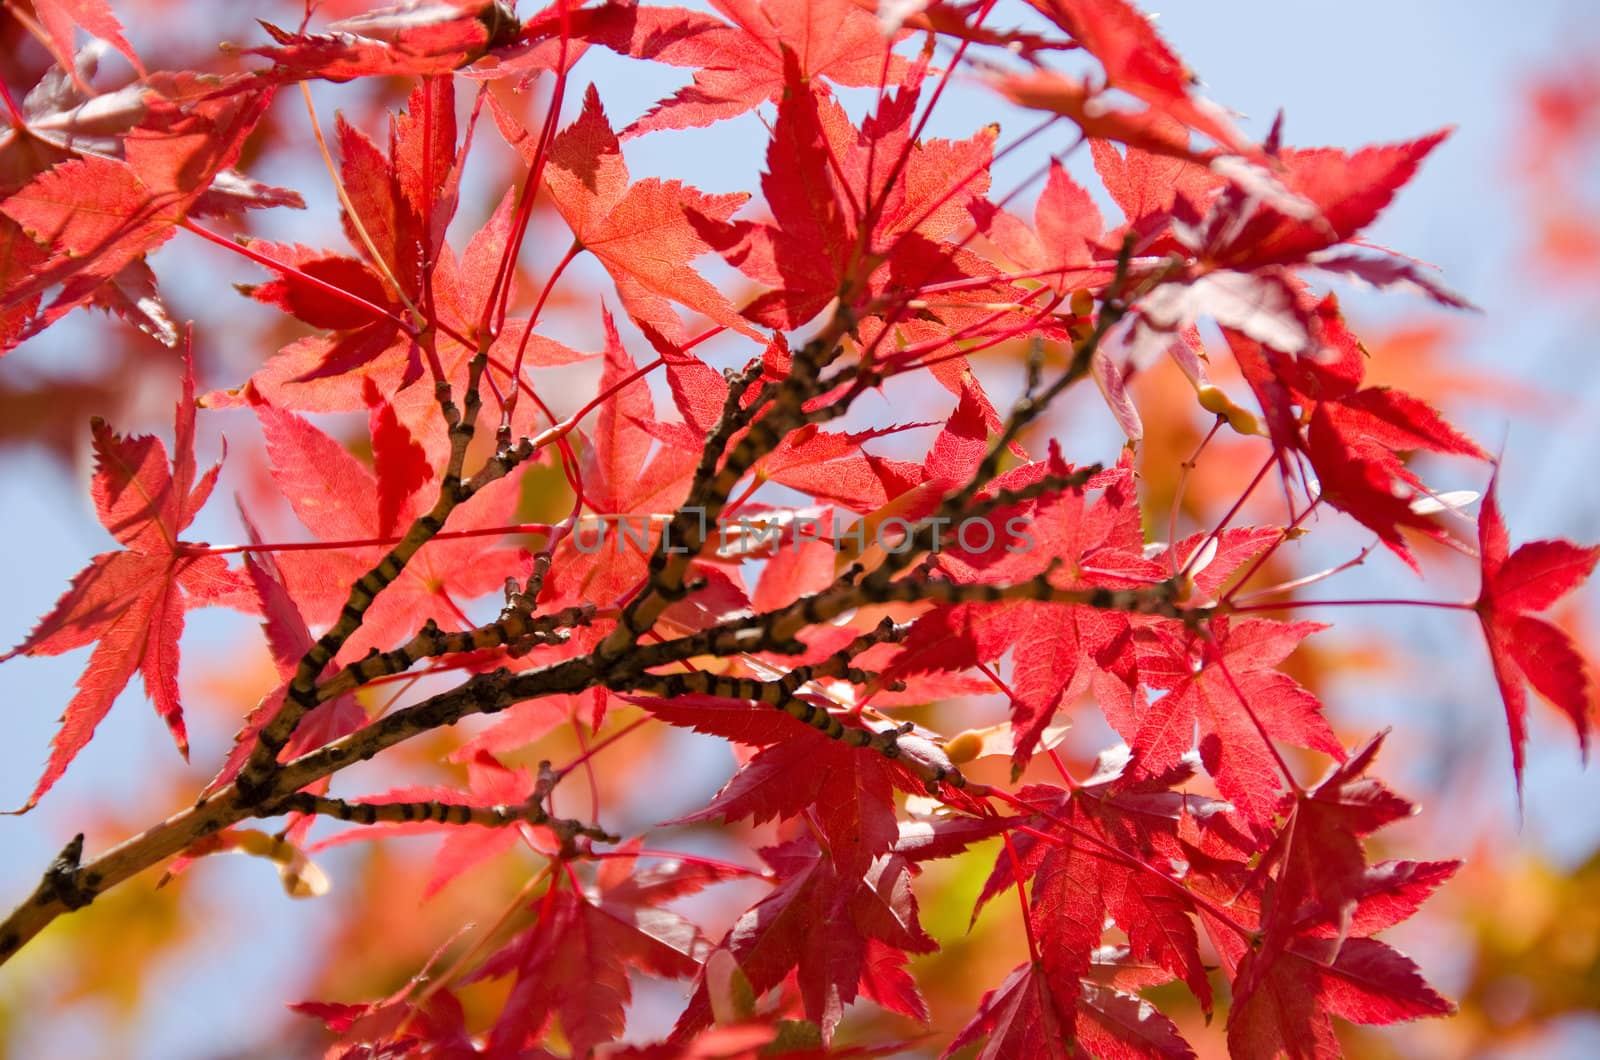 Red leaves of the japanese maple in autumn, foliage